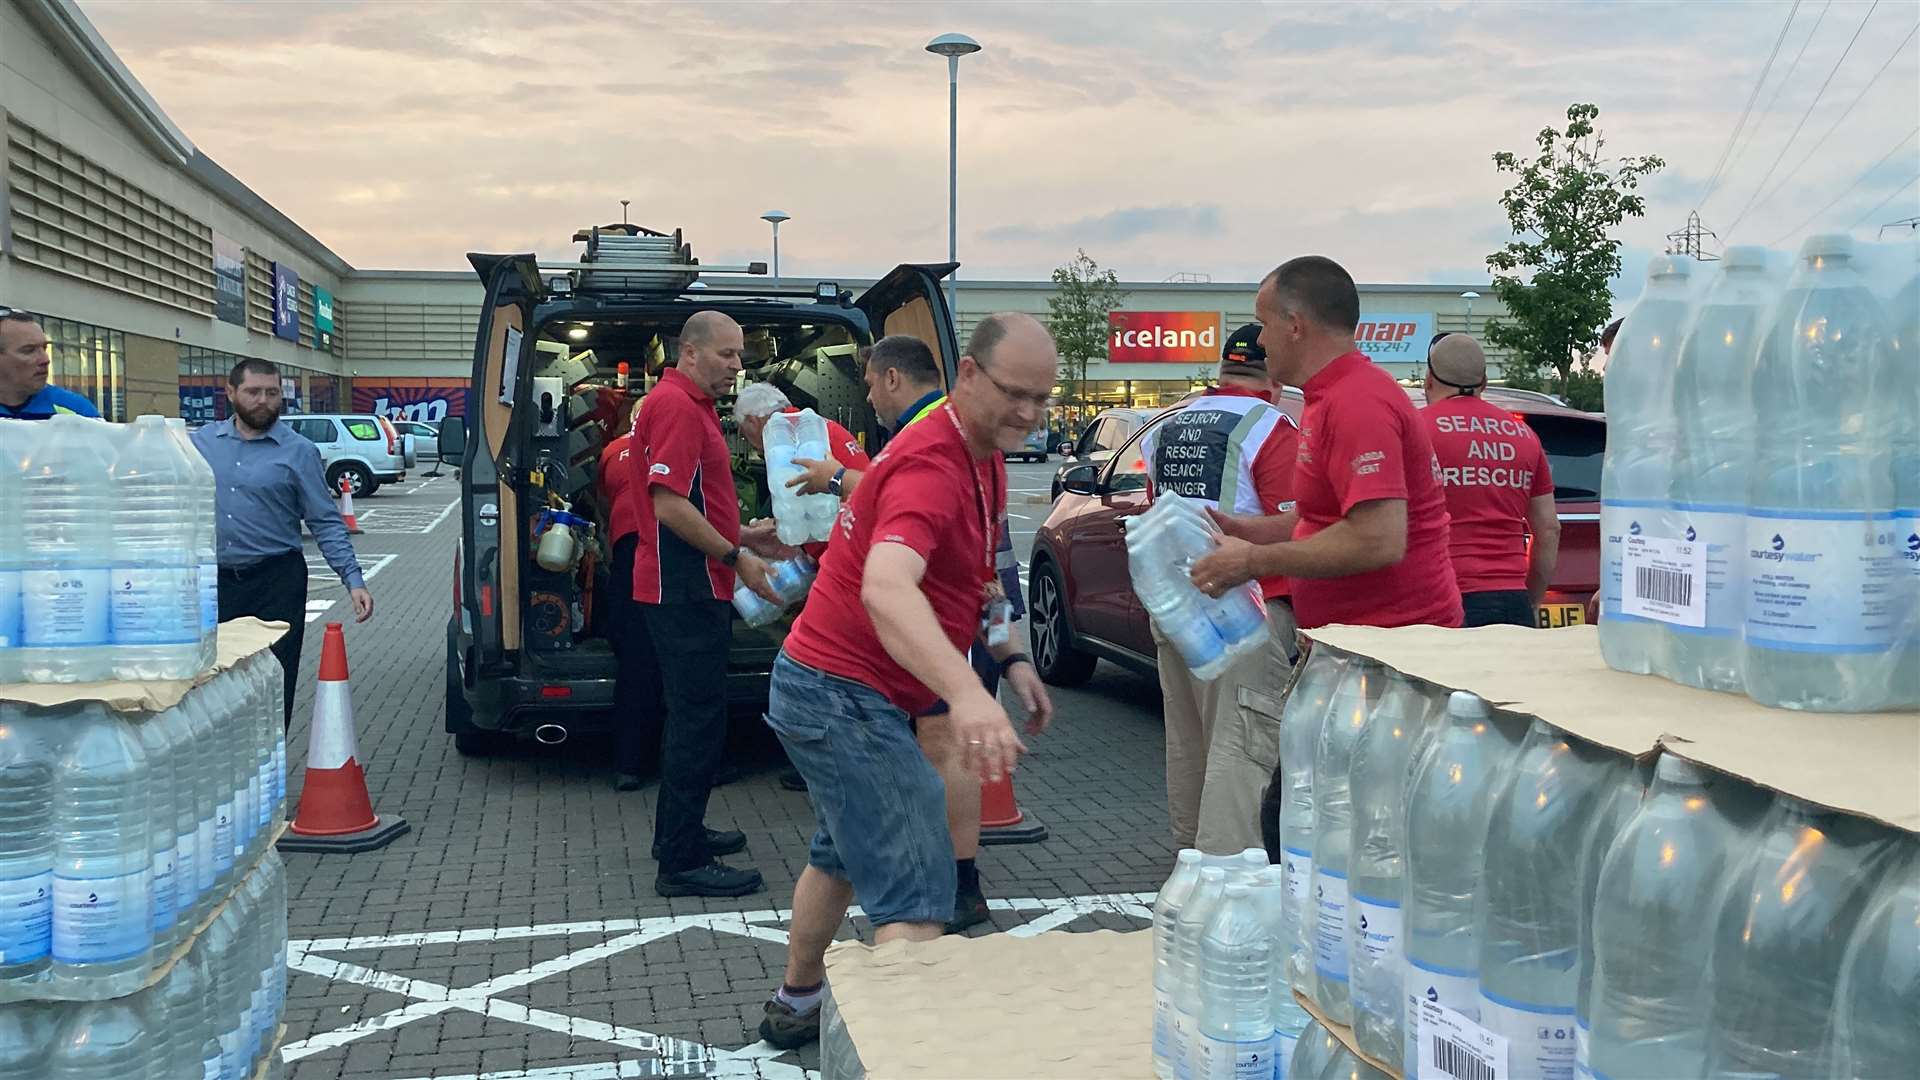 Kent Search and Rescue volunteers distributing bottles of water at Neats Court retail park